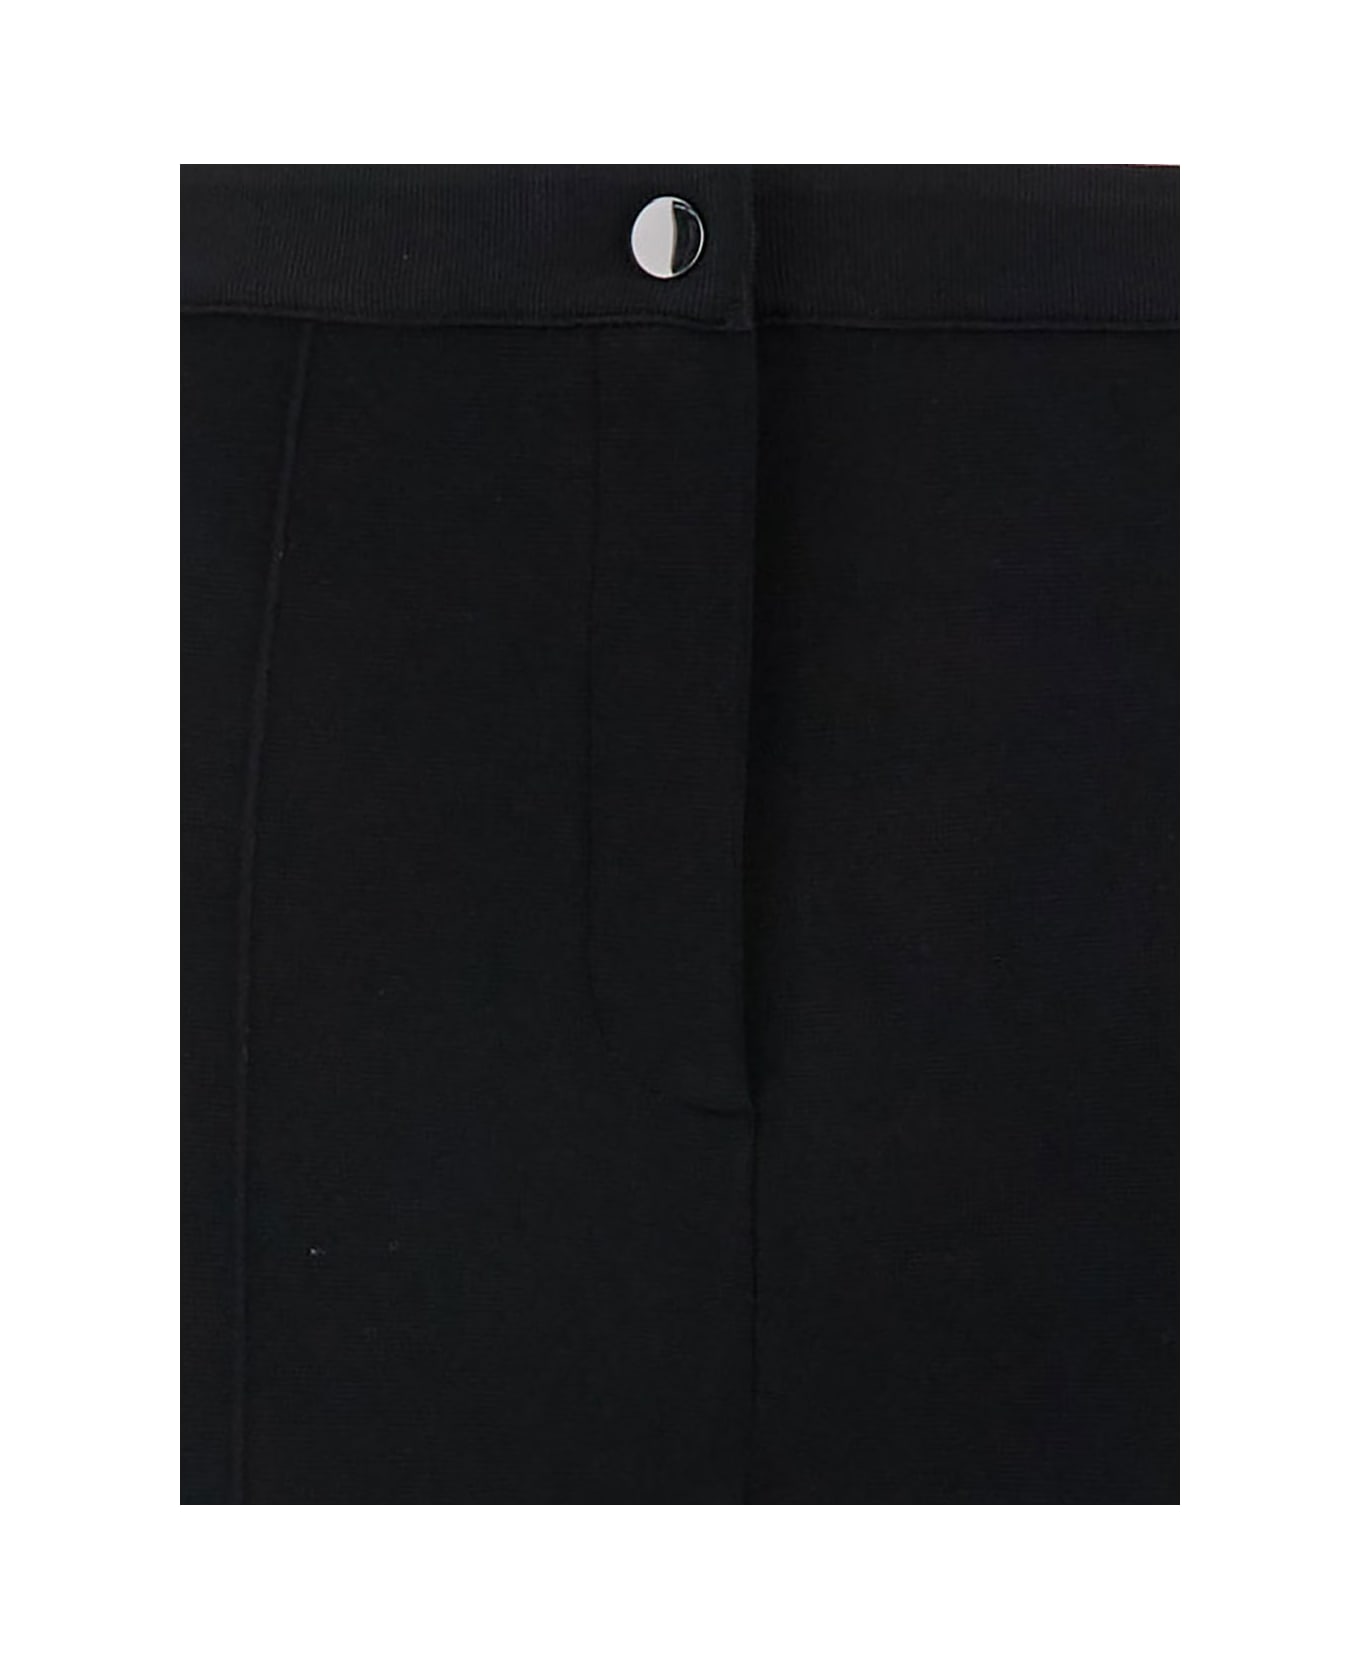 Theory Black Flared Pants With Button Closure In Viscose Blend Woman - Black ボトムス